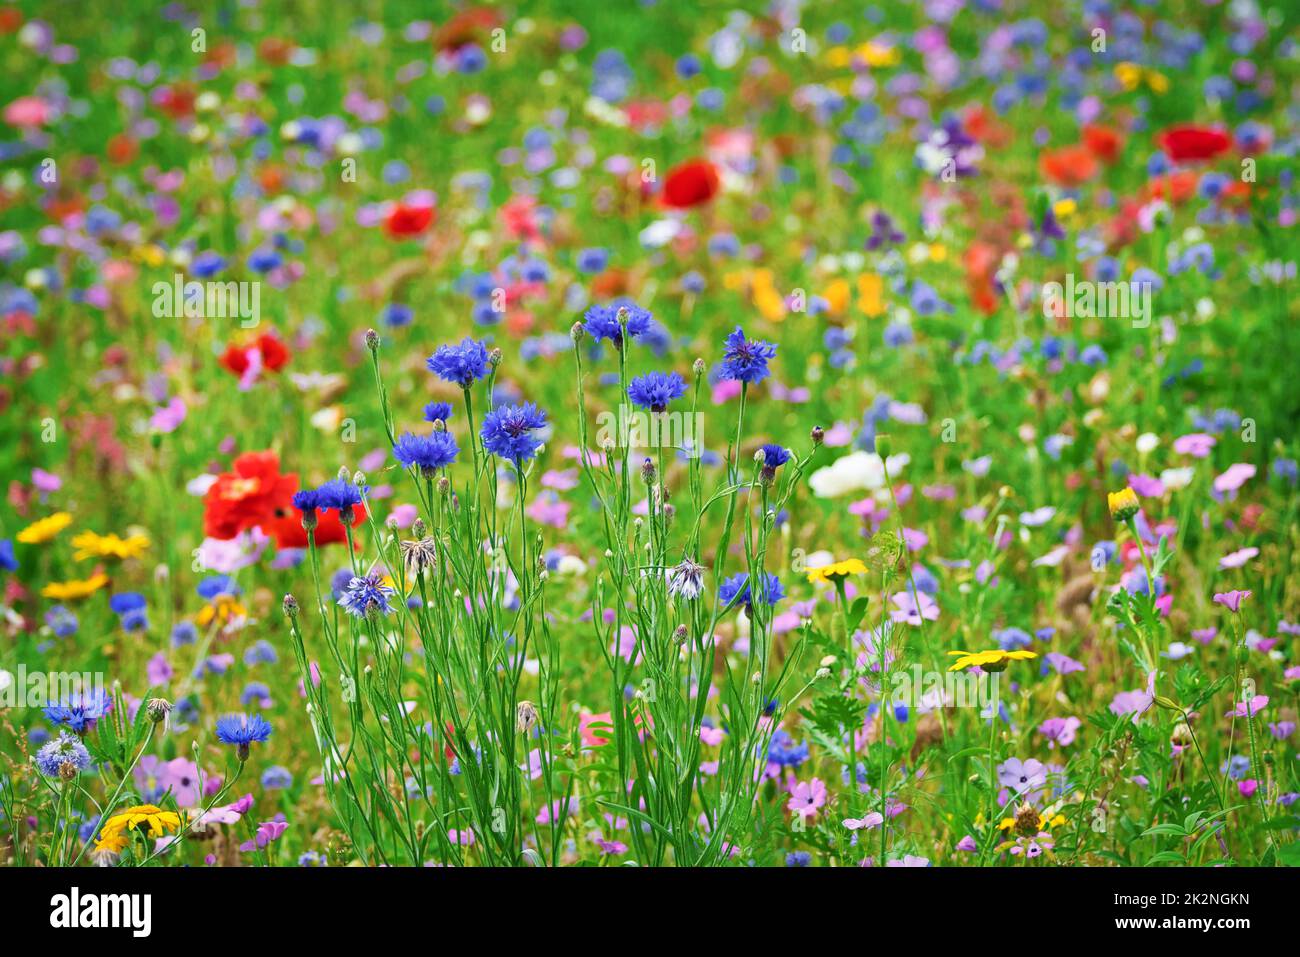 Beautiful bluebottles in a flower field with red poppies and other field flowers. Stock Photo